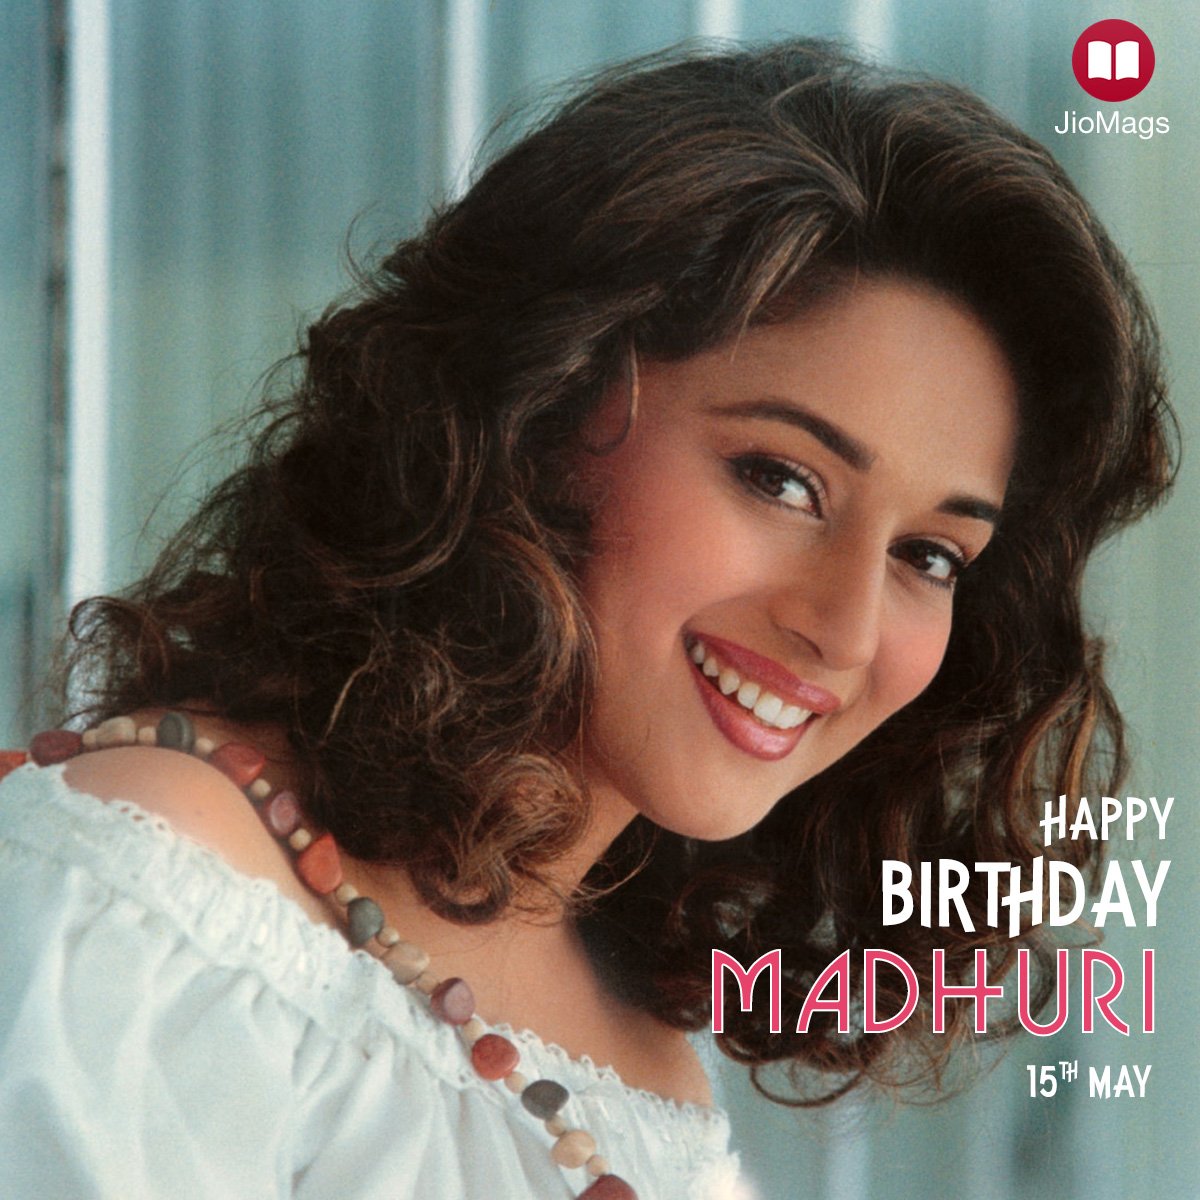 Wishing the gorgeous and talented Madhuri Dixit a very happy birthday! 